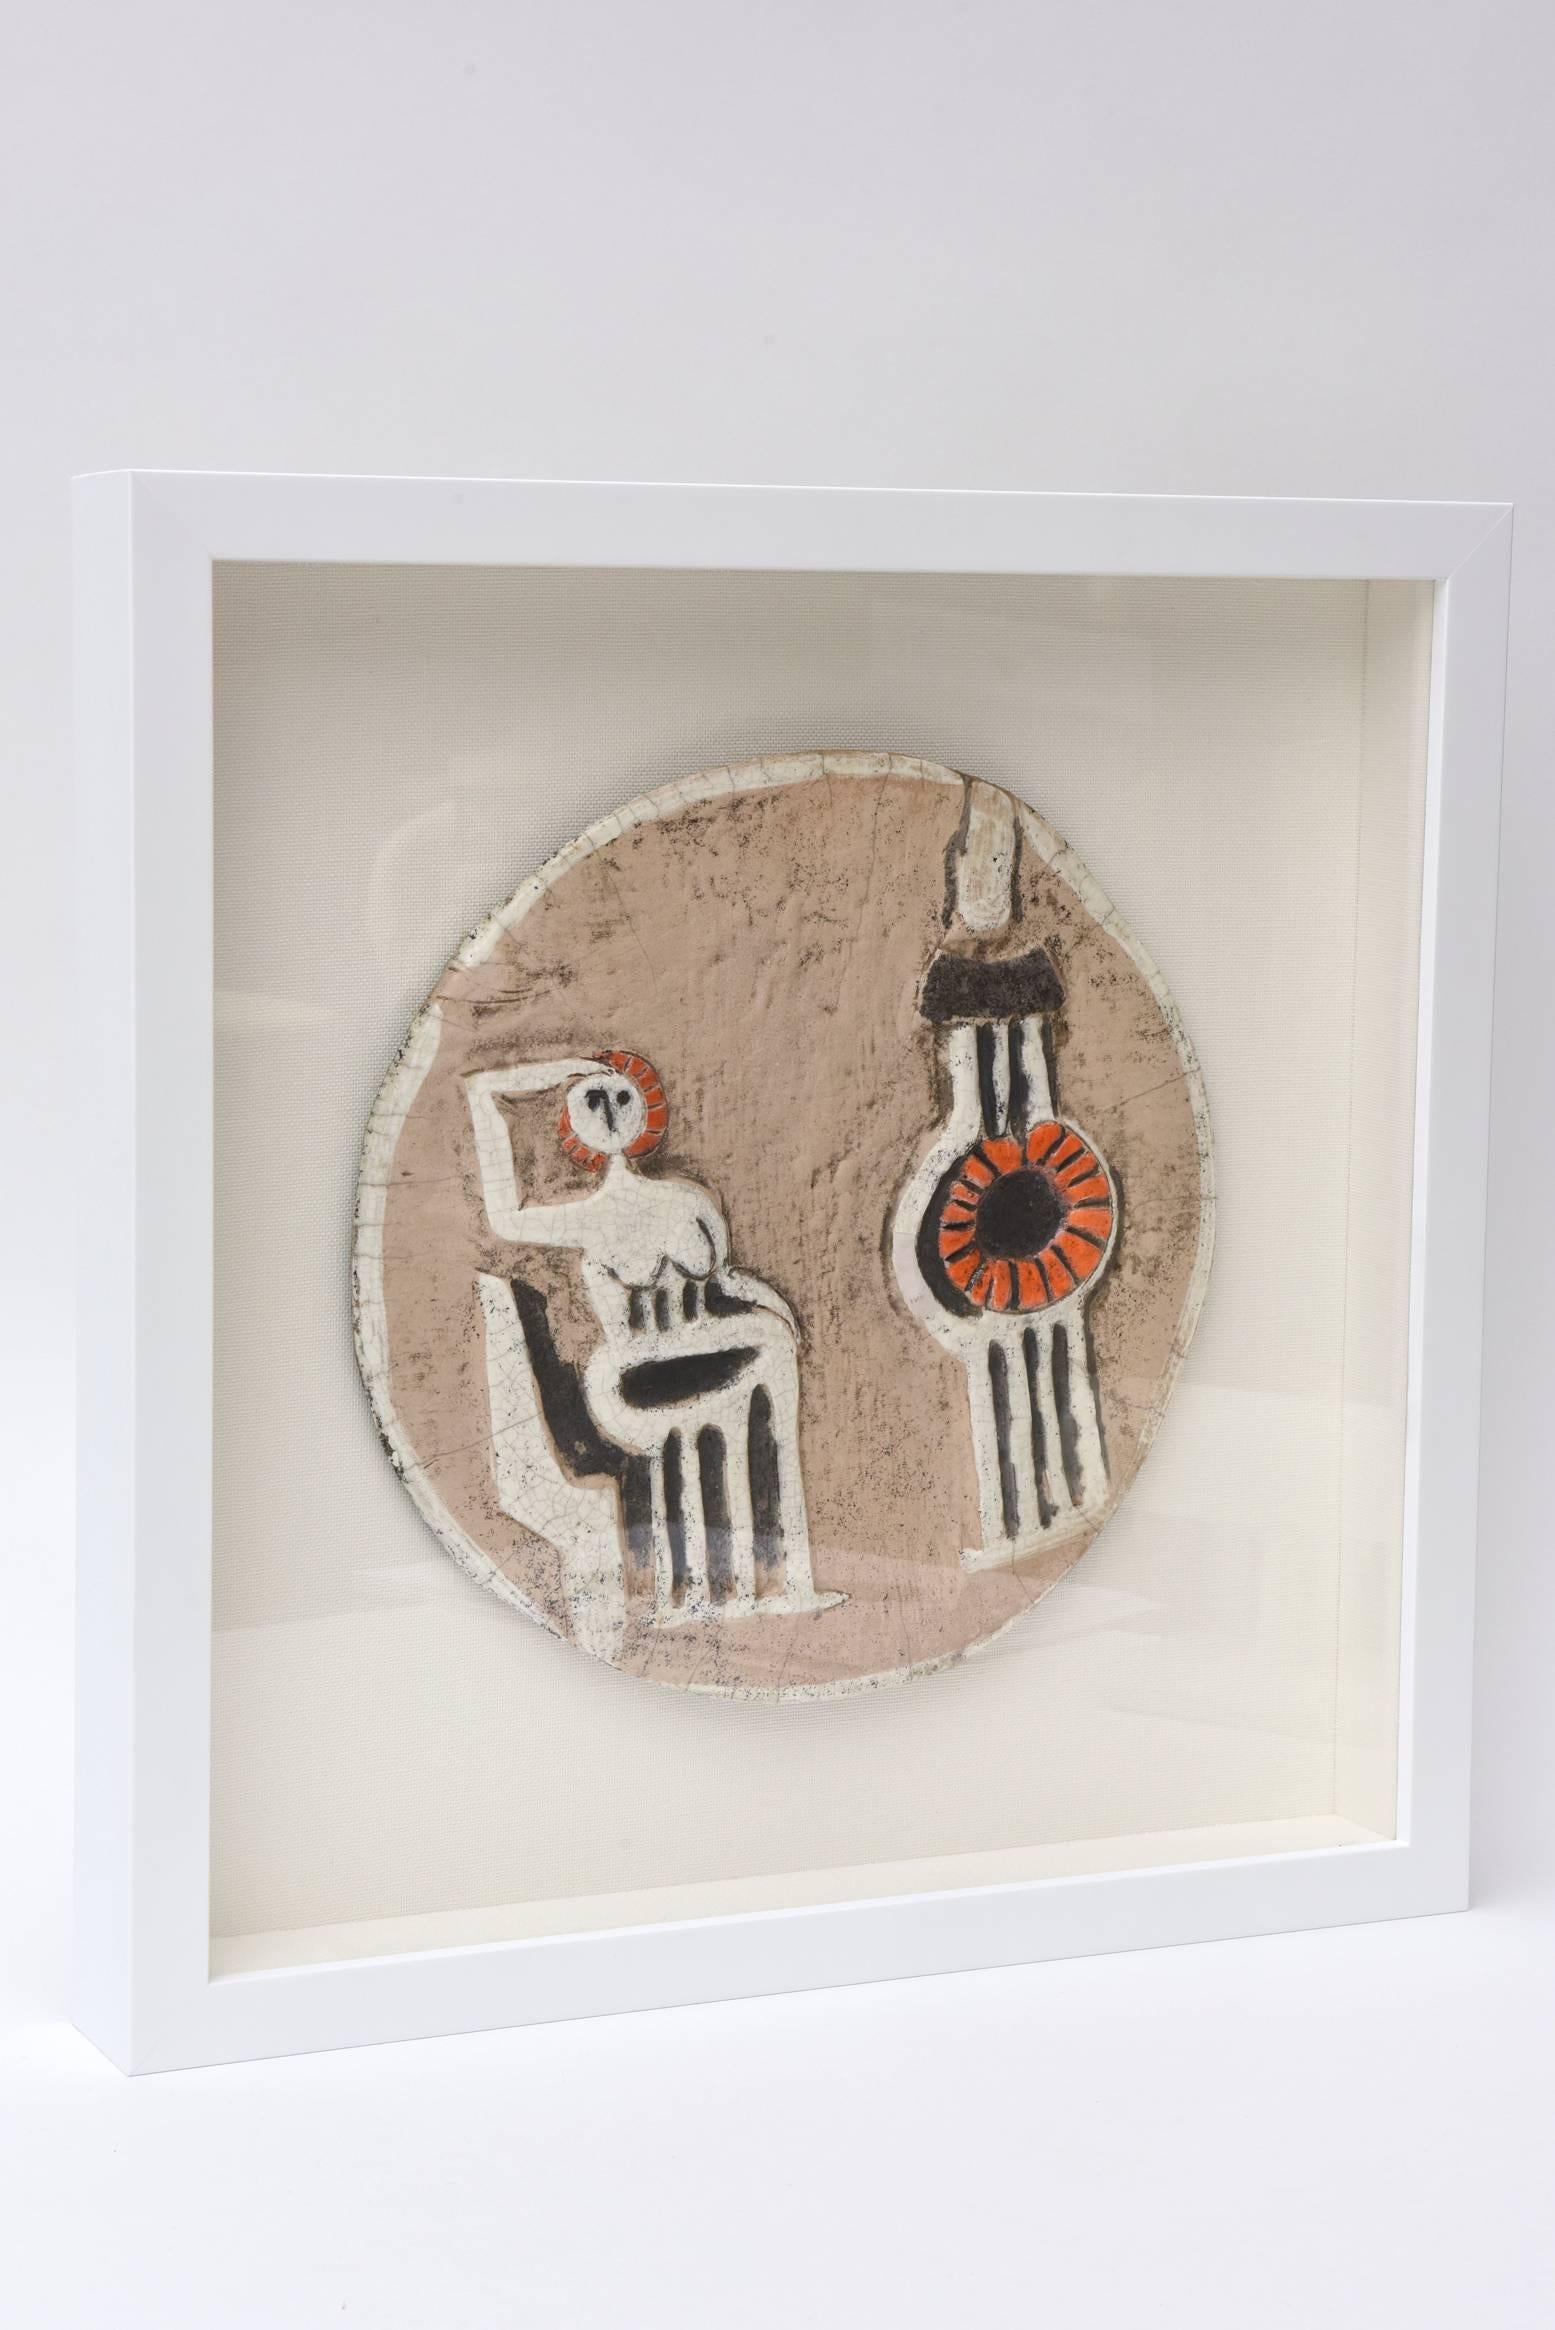 This wonderful studio ceramic disk plate sculpture was done in the 1970s by a Miami professor of the University of the Arts. It is signed but unfortunately illegible. It has the influence of Alfredo Lam meets Picasso. It is obvious that these two